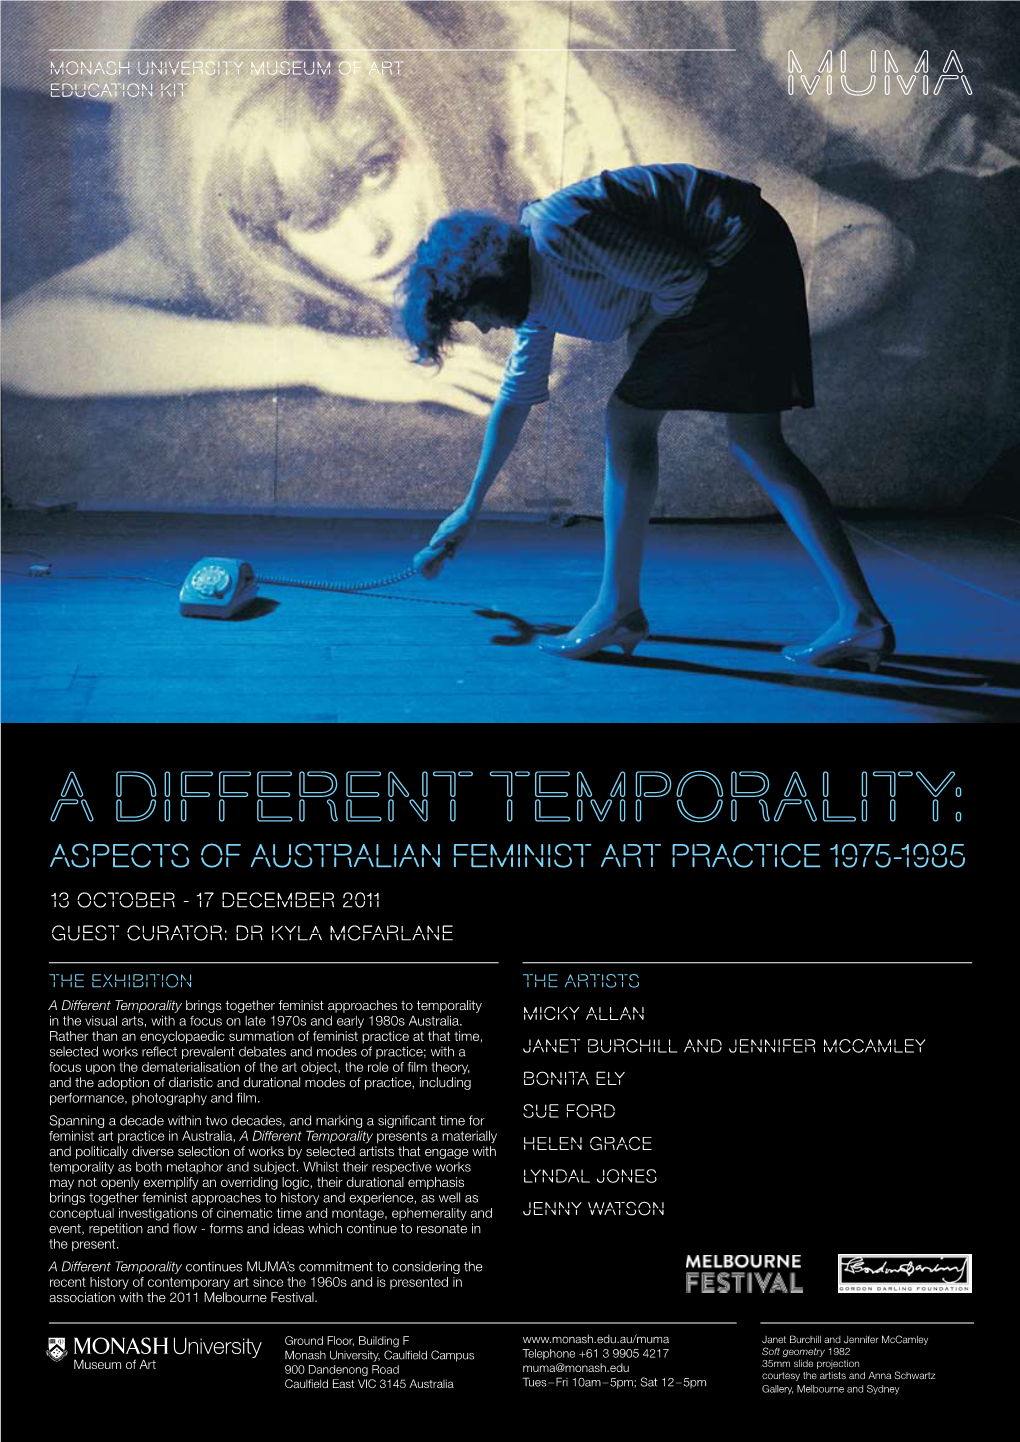 A Different Temporality: Feminist Art, 2011